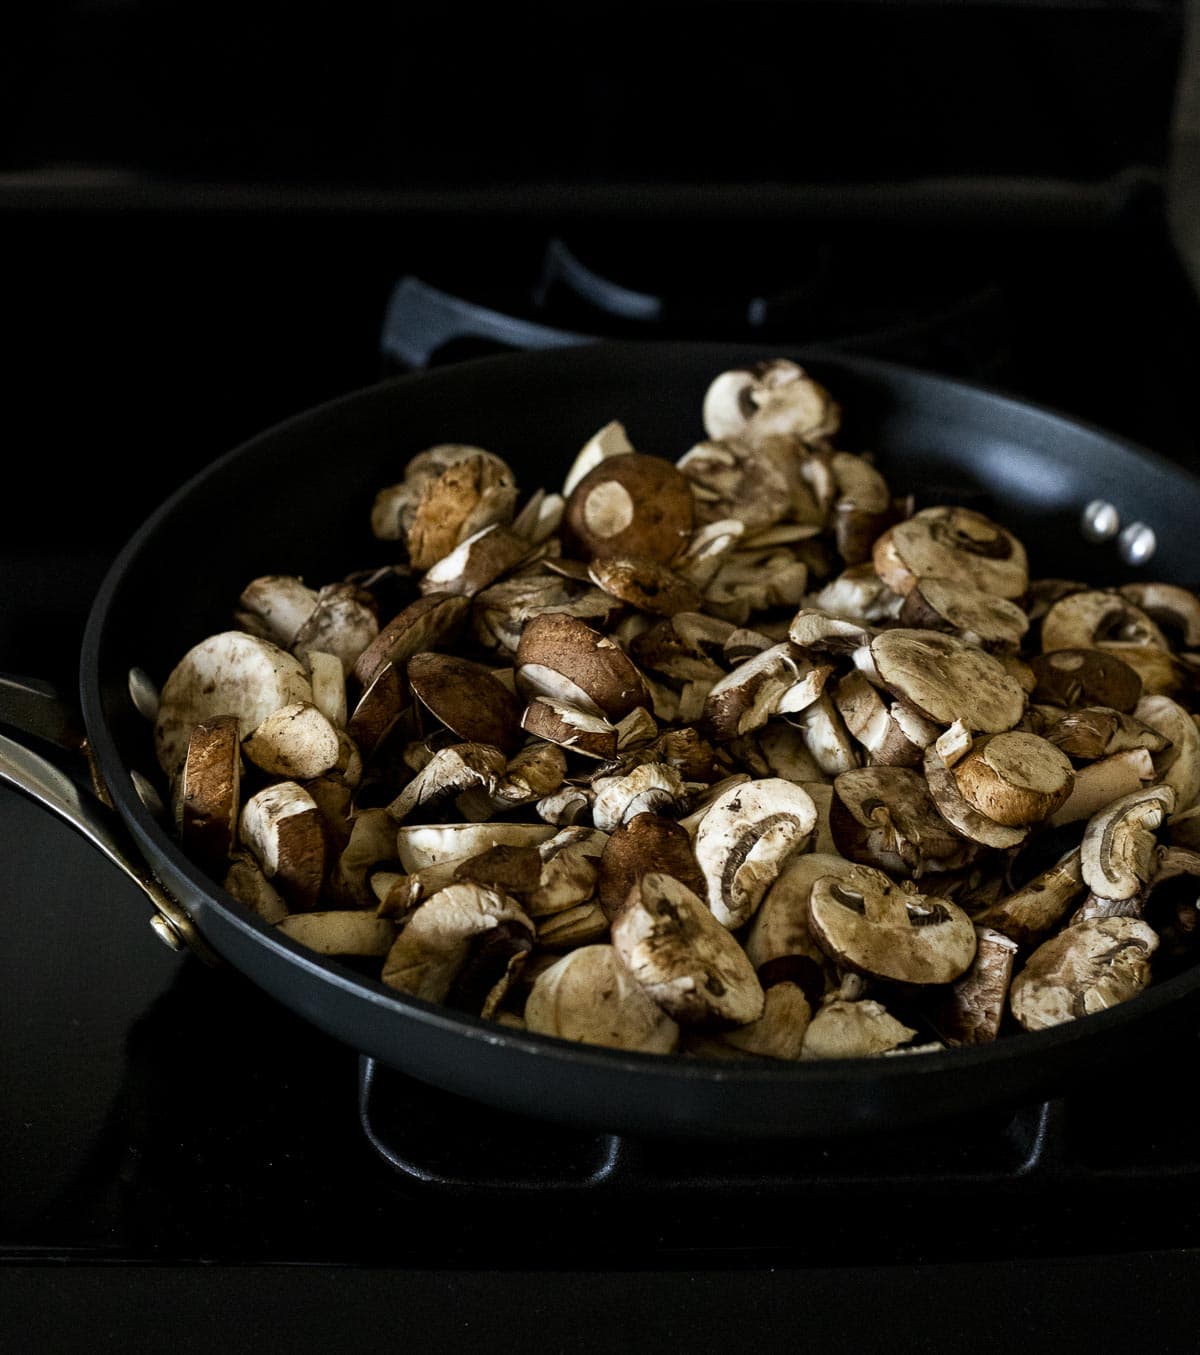 Mushrooms sauteing in a skillet.